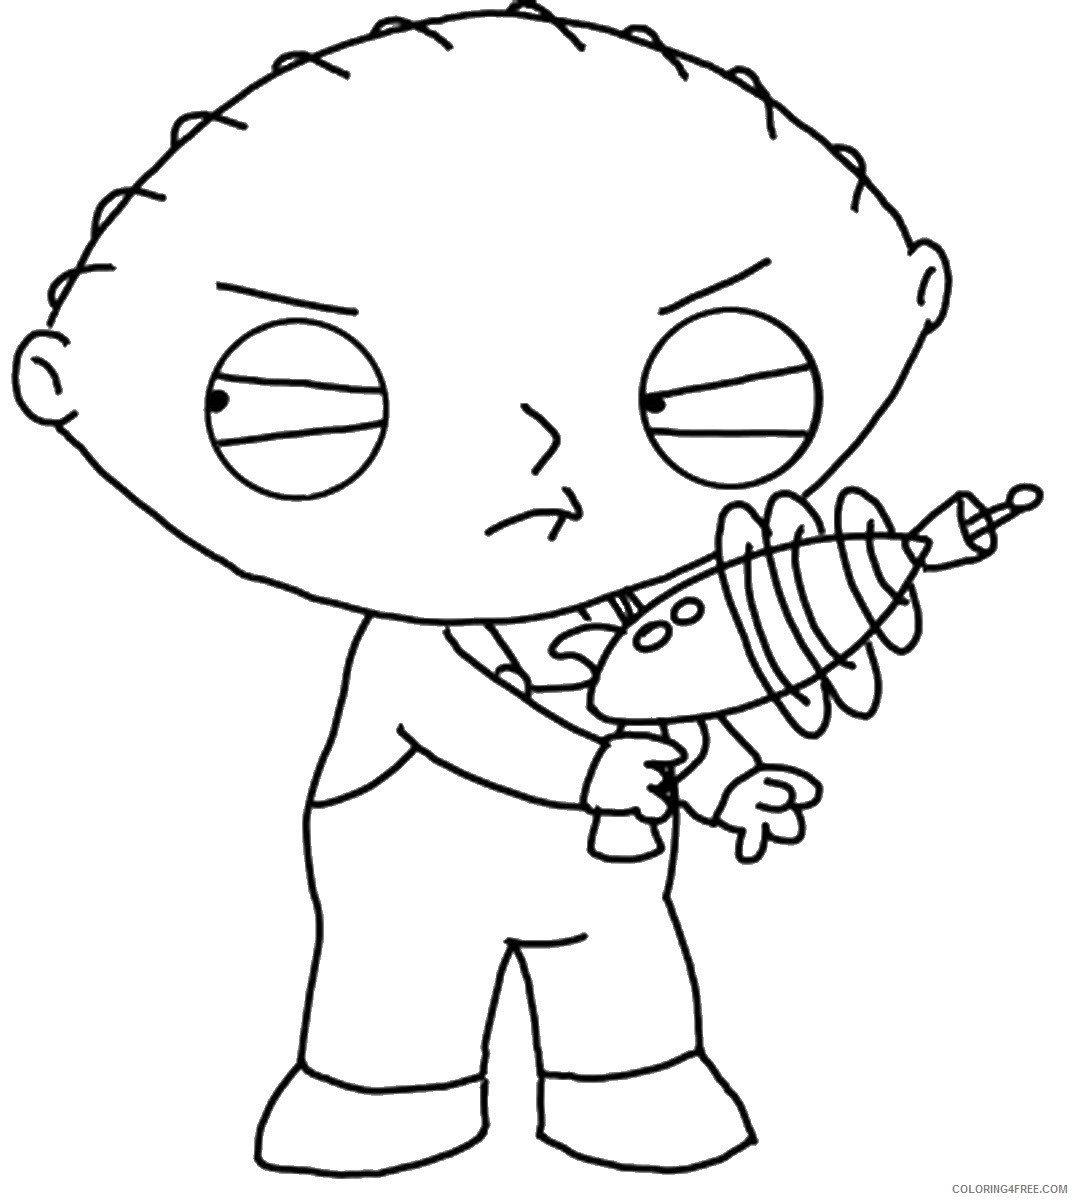 Family Guy Coloring Pages Cartoons family_guy_cl_06 Printable 2020 2722 Coloring4free